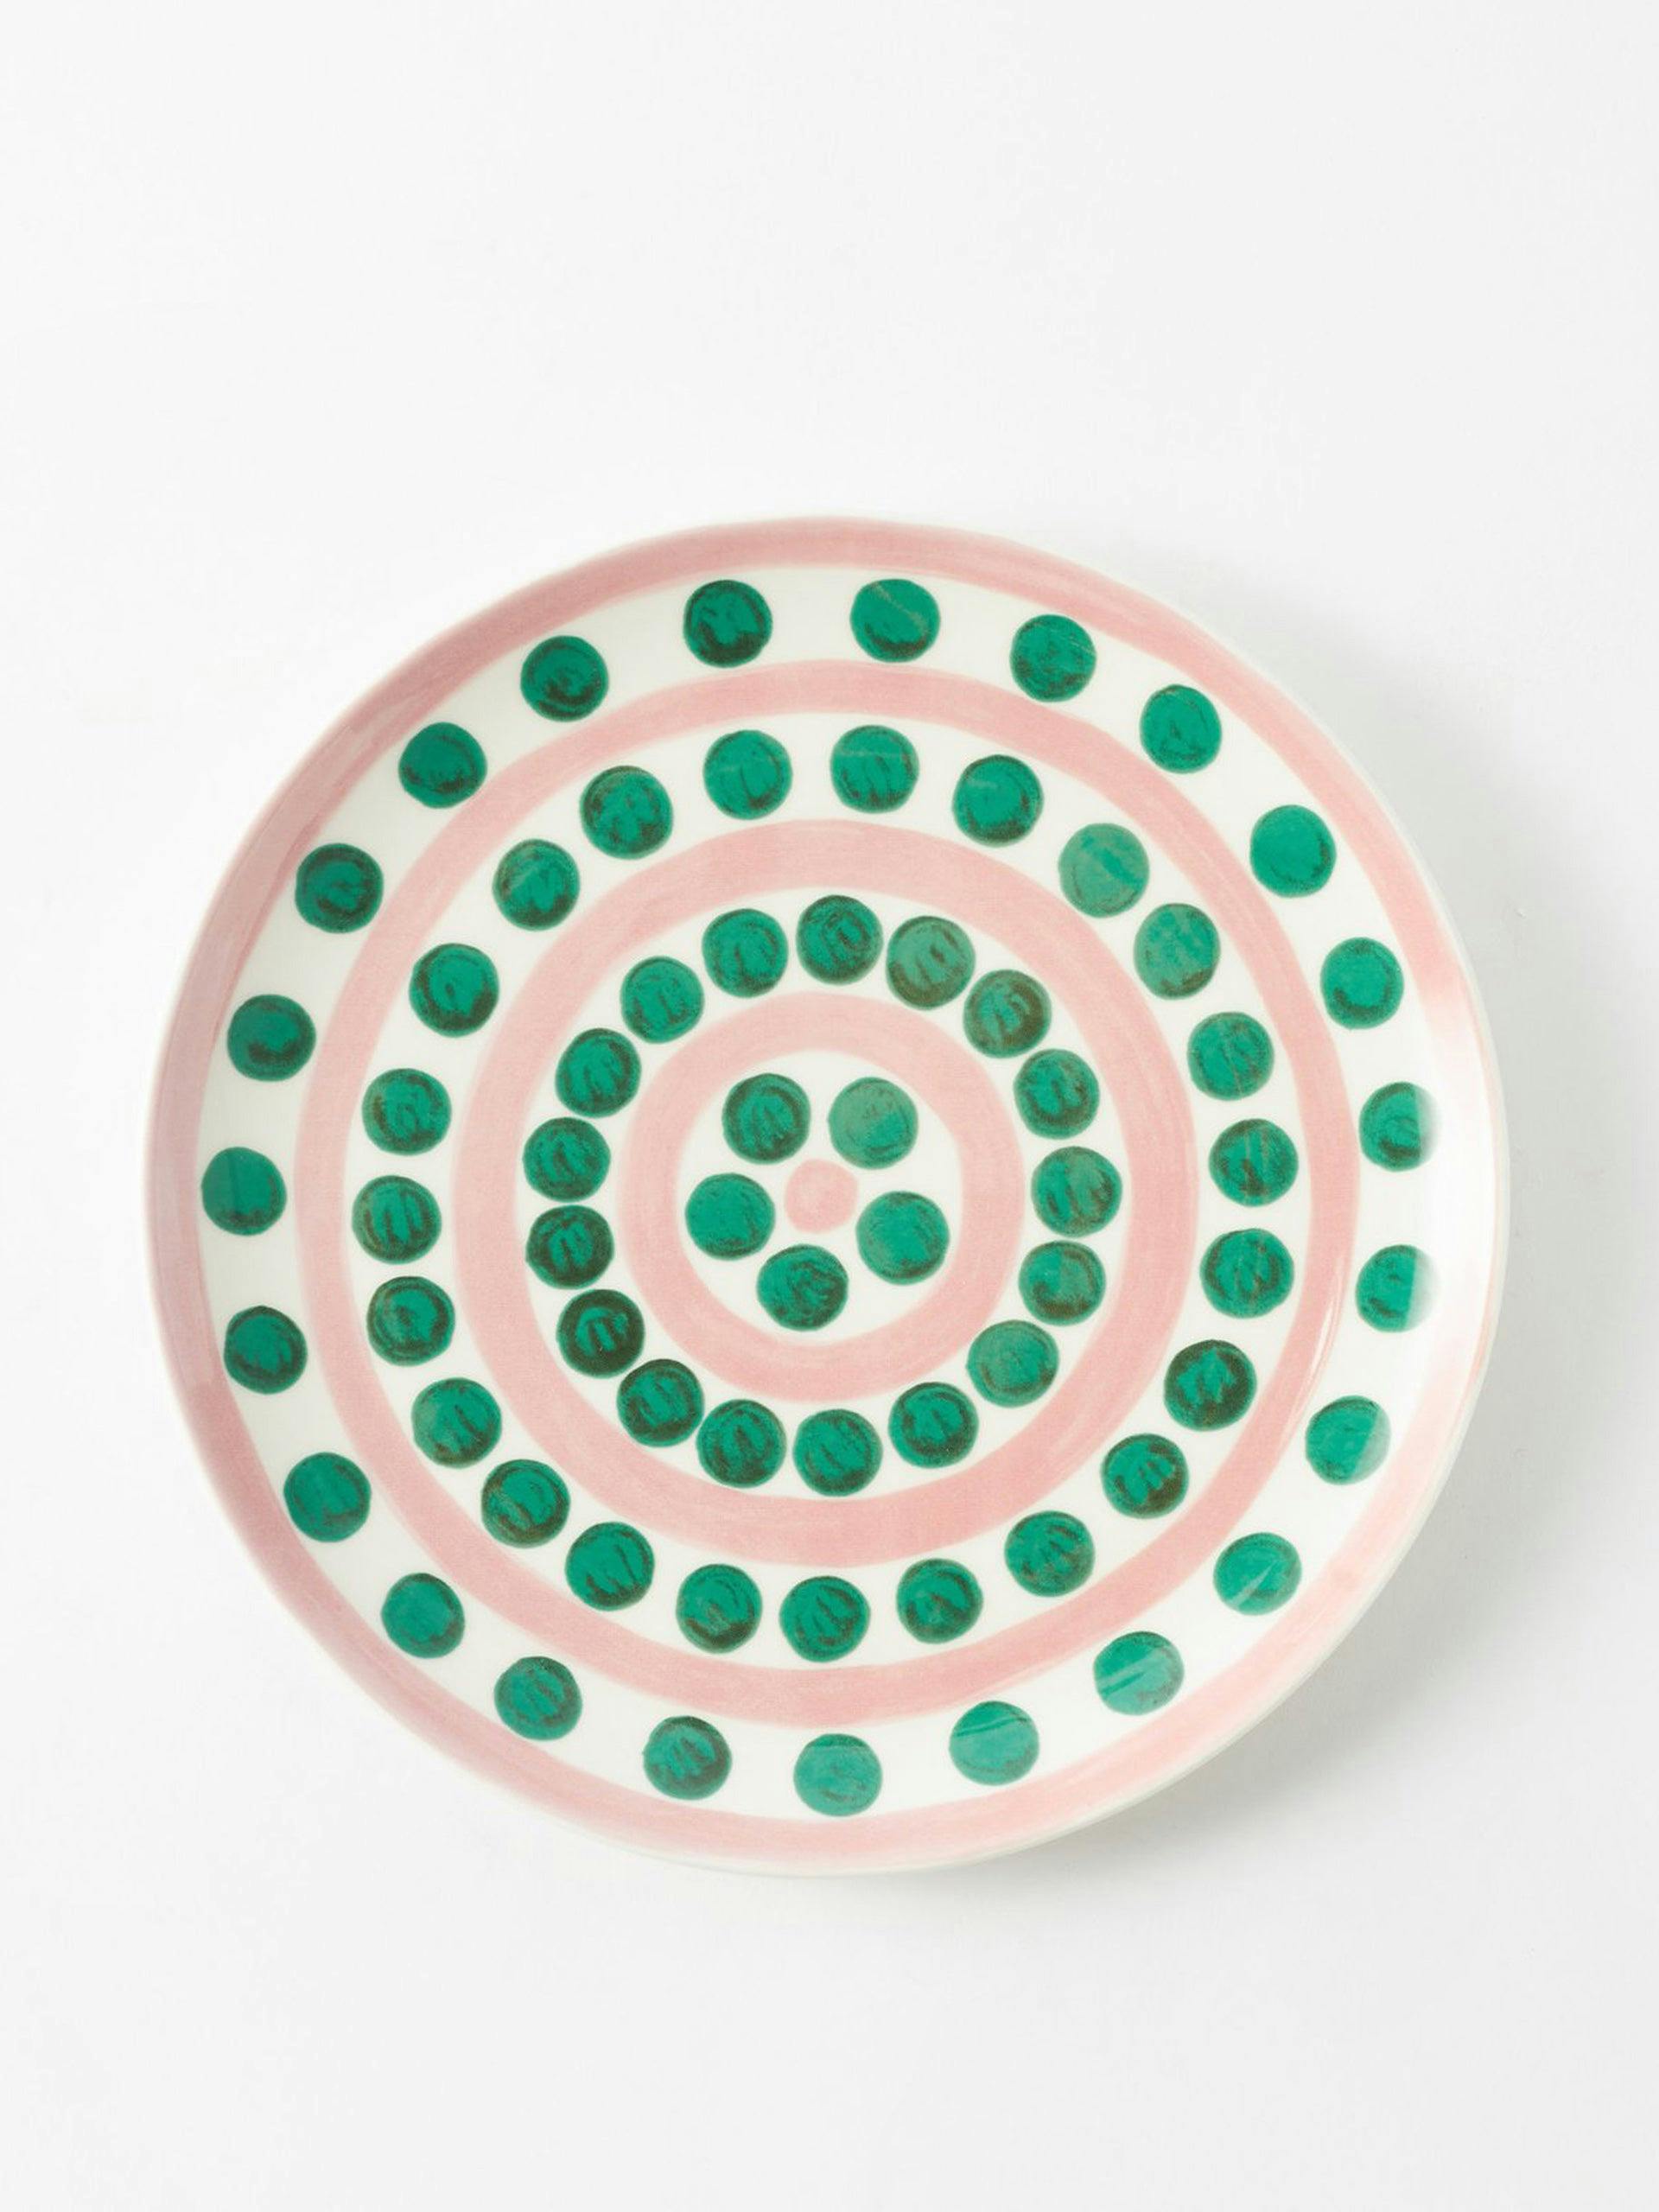 Pink and green plate